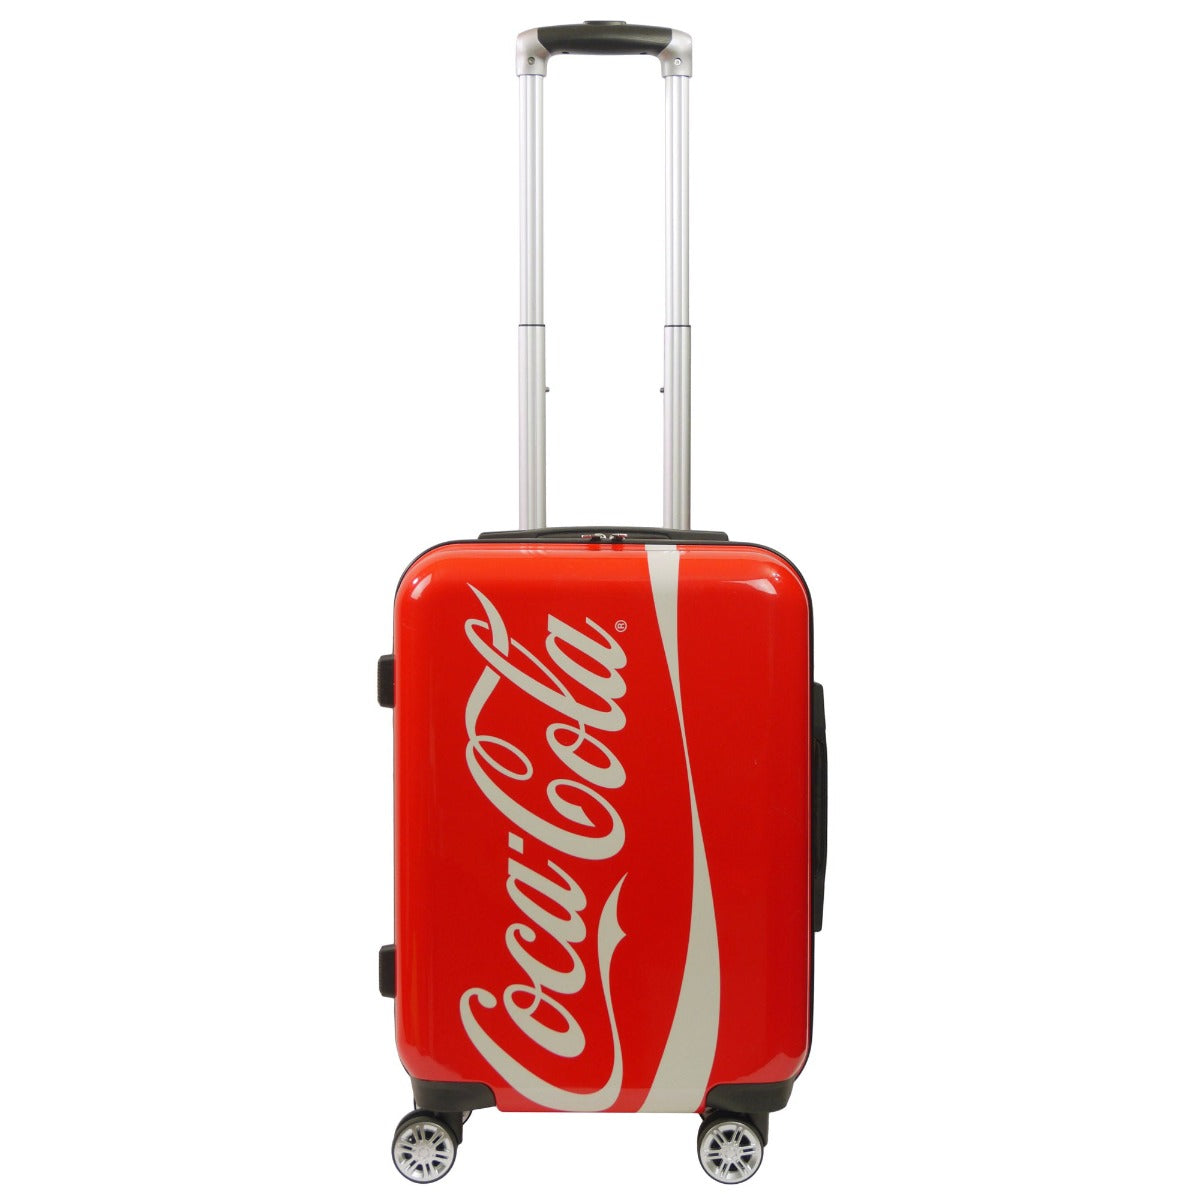 Ful Coca Cola 21" hardside spinner luggage suitcase - best travelling carry on suitcases